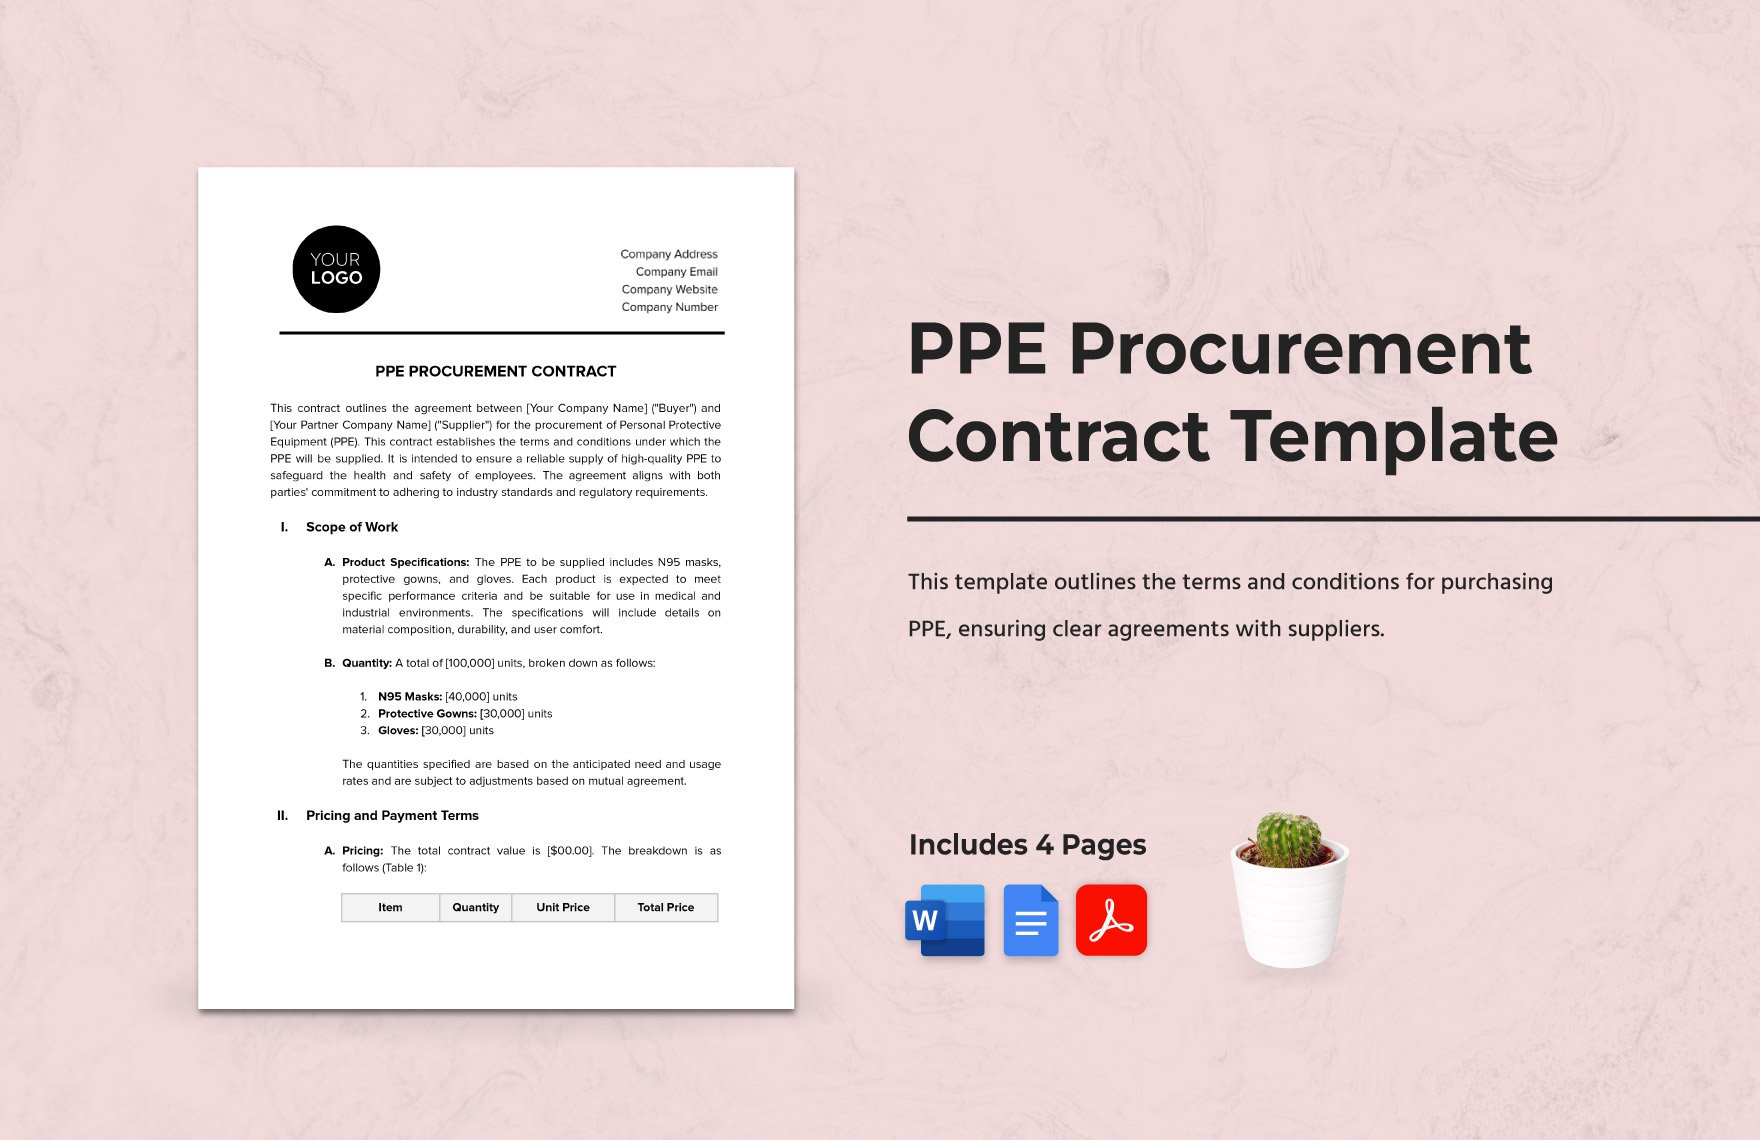 PPE Procurement Contract Template